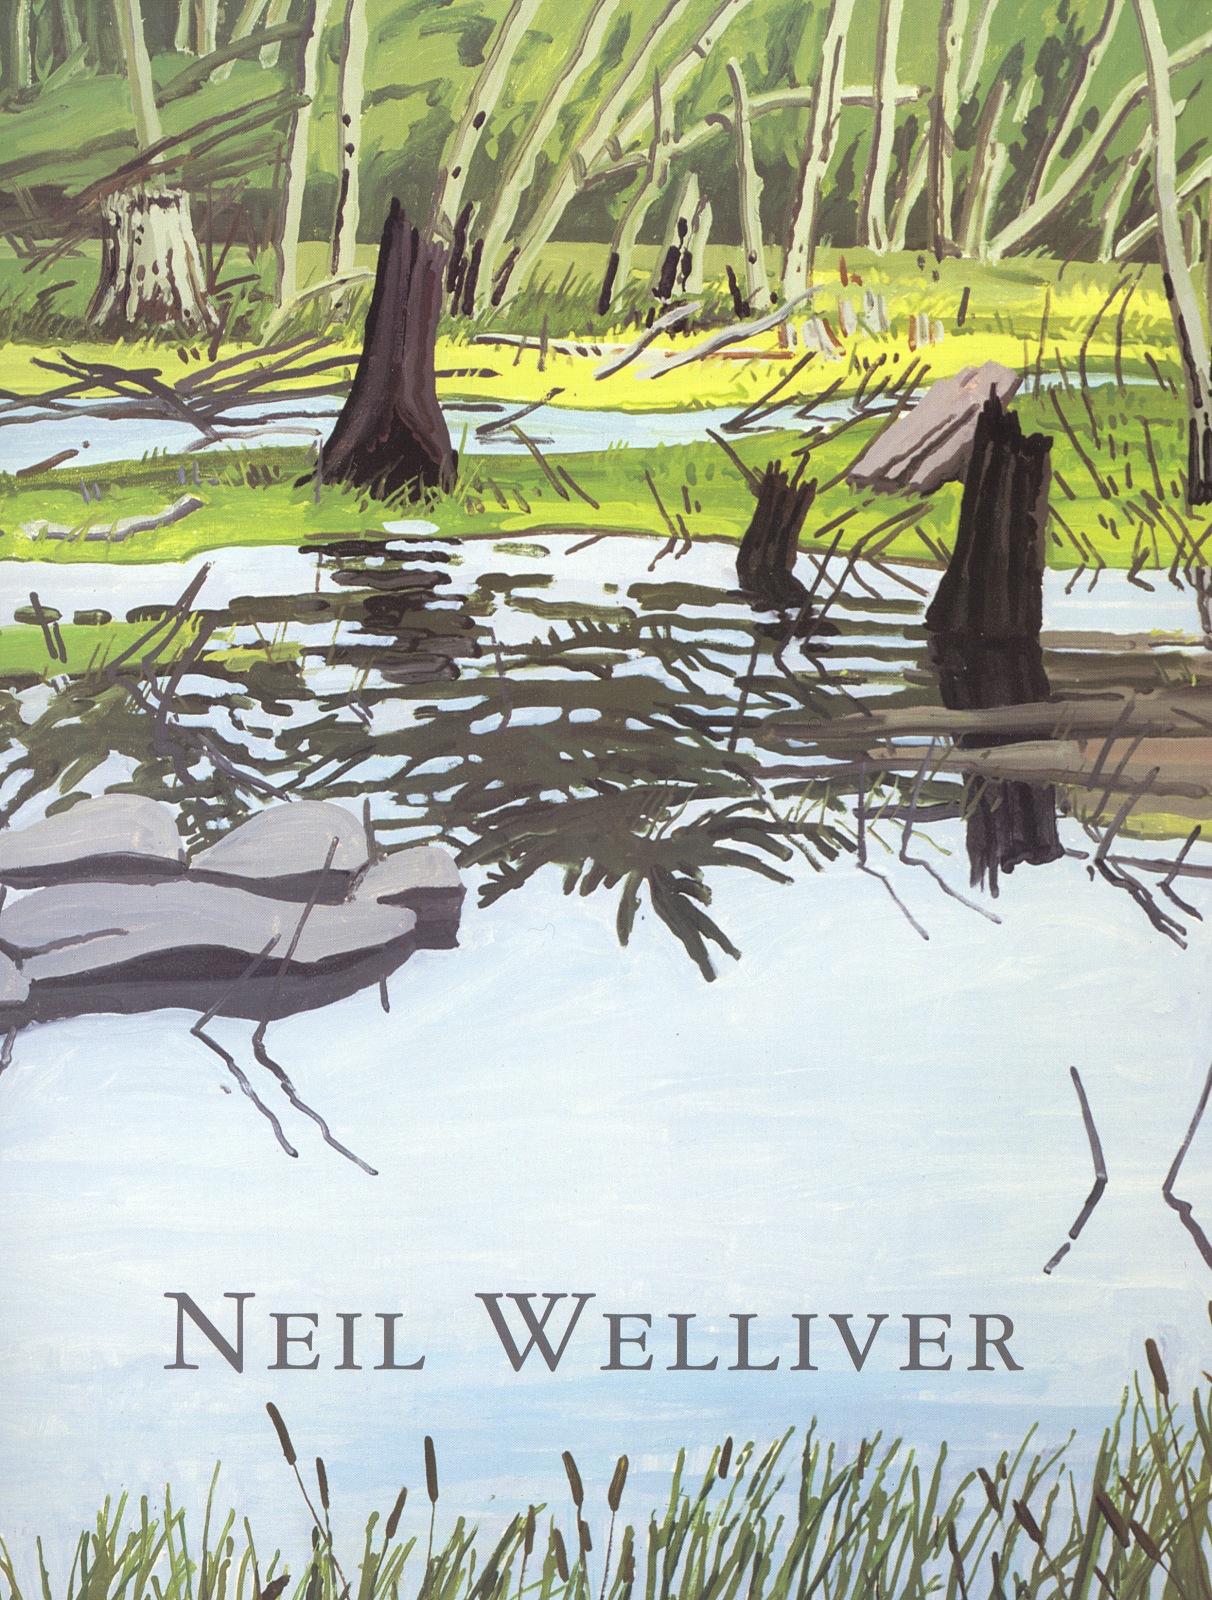 Paintings 1983 - 2001 at The Ogunquit Museum of Art - Neil Welliver - Catalogues - Alexandre Gallery